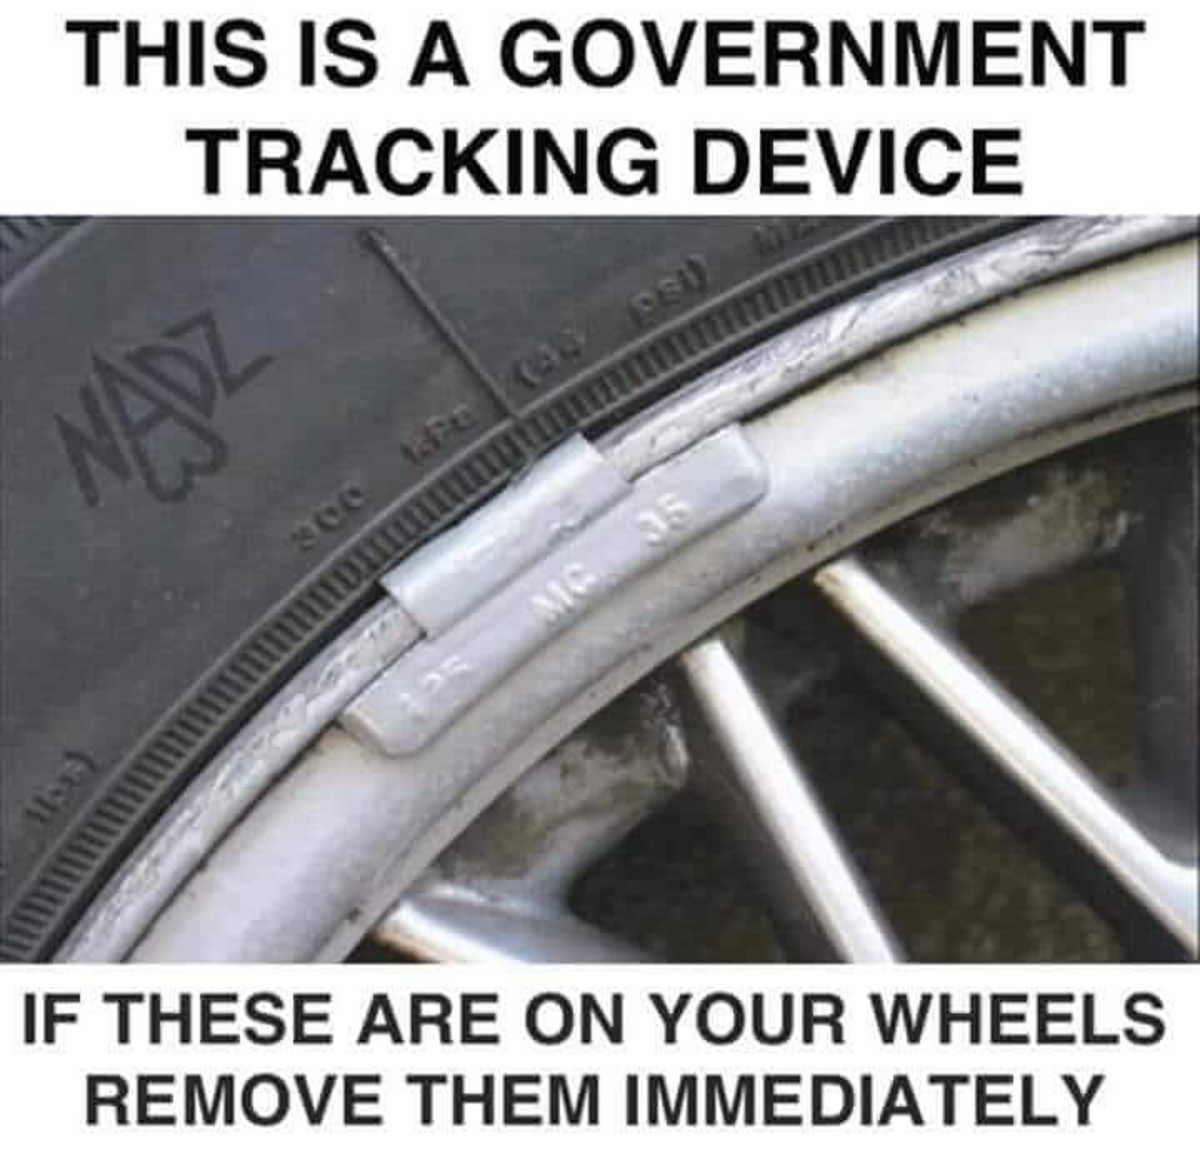 They Are Tracking You!. .. I’m a tard when it comes to cars. Obviously removing that part is bad, but can someone enlighten me as to what it is exactly